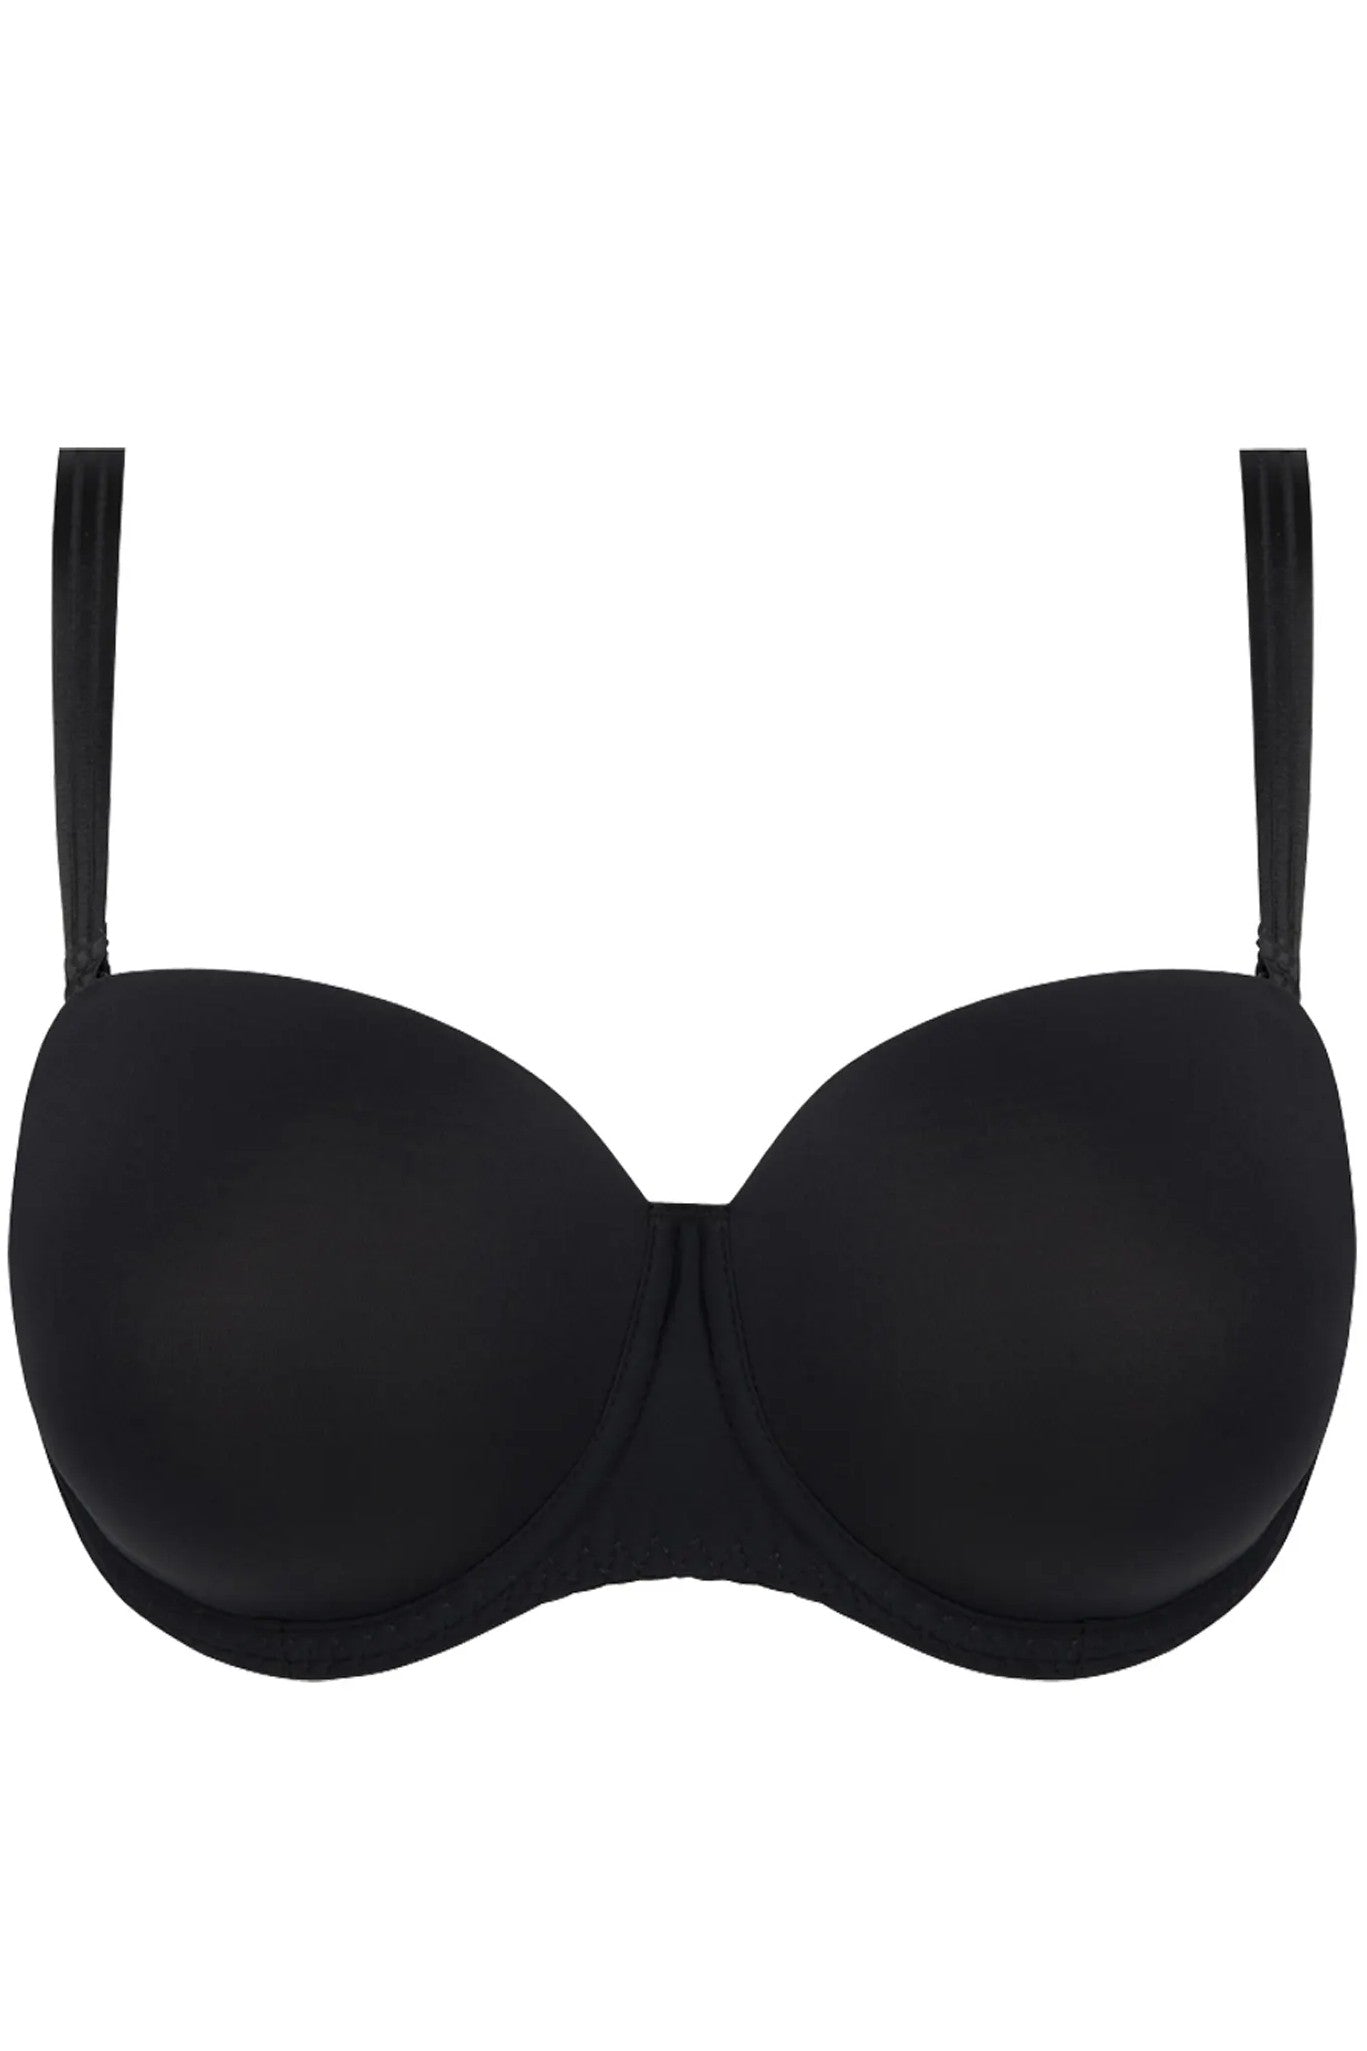 WOWENY Strapless Bra for Women Comfortable Non-Slip Silicone Padded Bandeau  Bra Seamless Wireless Tube Top Bralette(Black,L) at  Women's Clothing  store